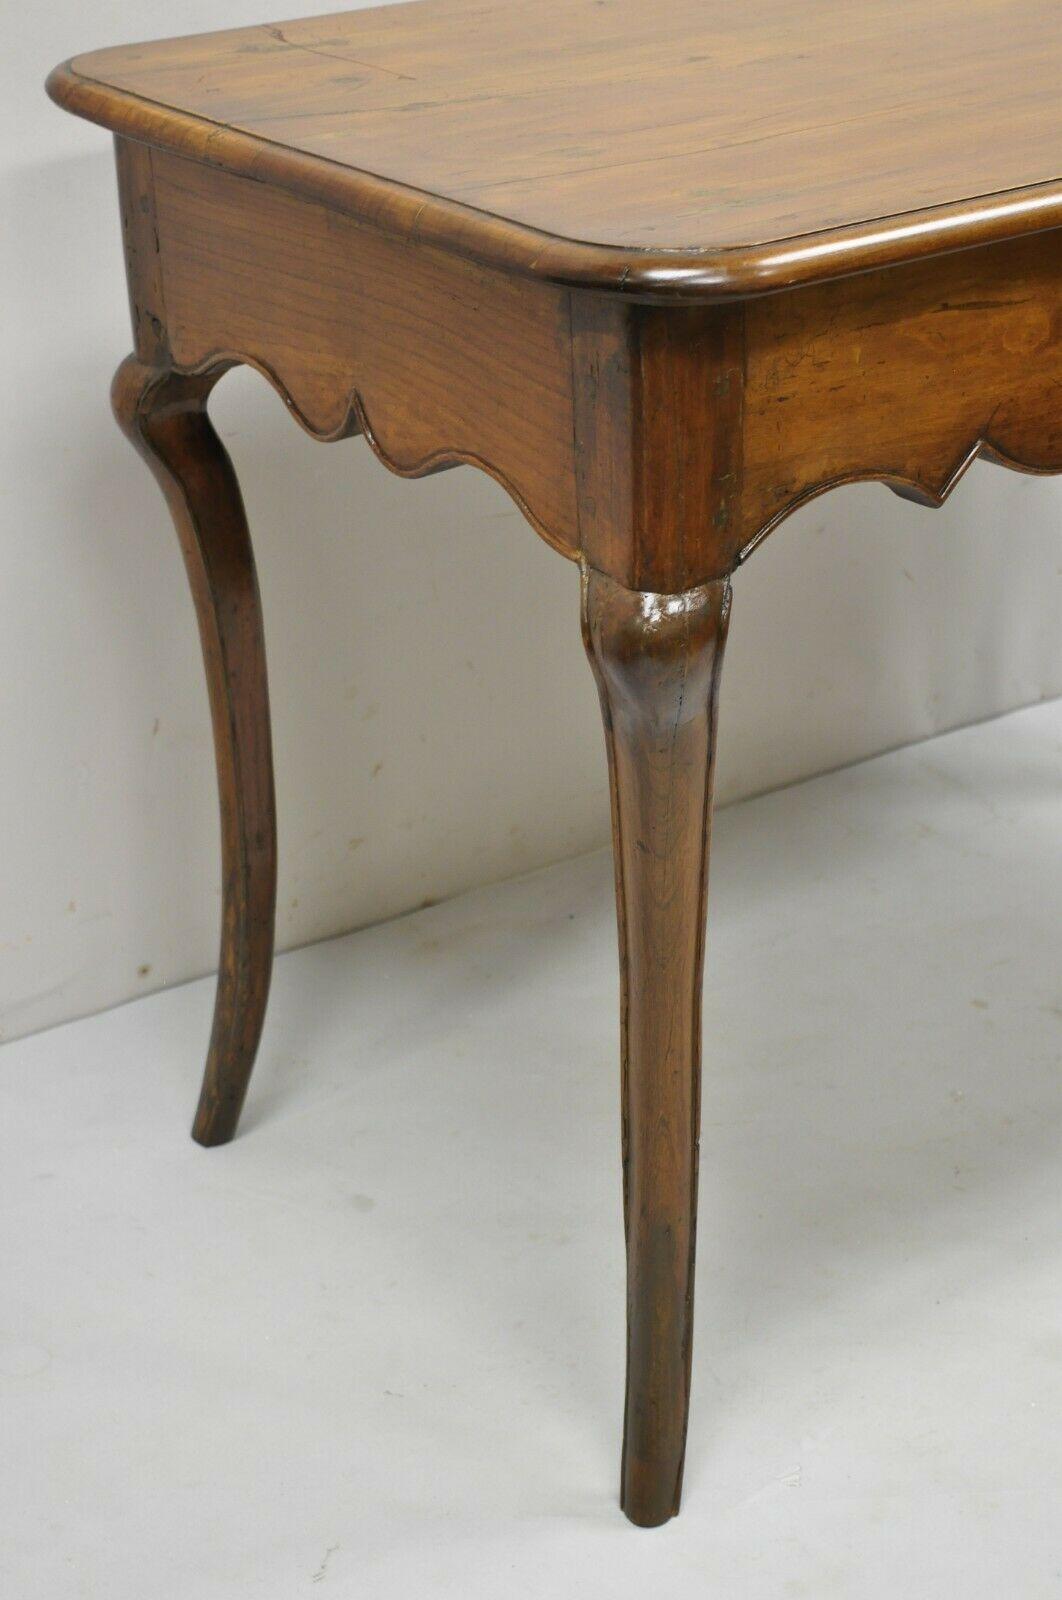 Antique Italian Provincial Carved Distressed Cherry Wood Saber Leg Desk Console Table. Item features solid wood construction, beautiful wood grain, distressed finish, nicely carved details, shapely saber legs, very nice antique item, quality Italian